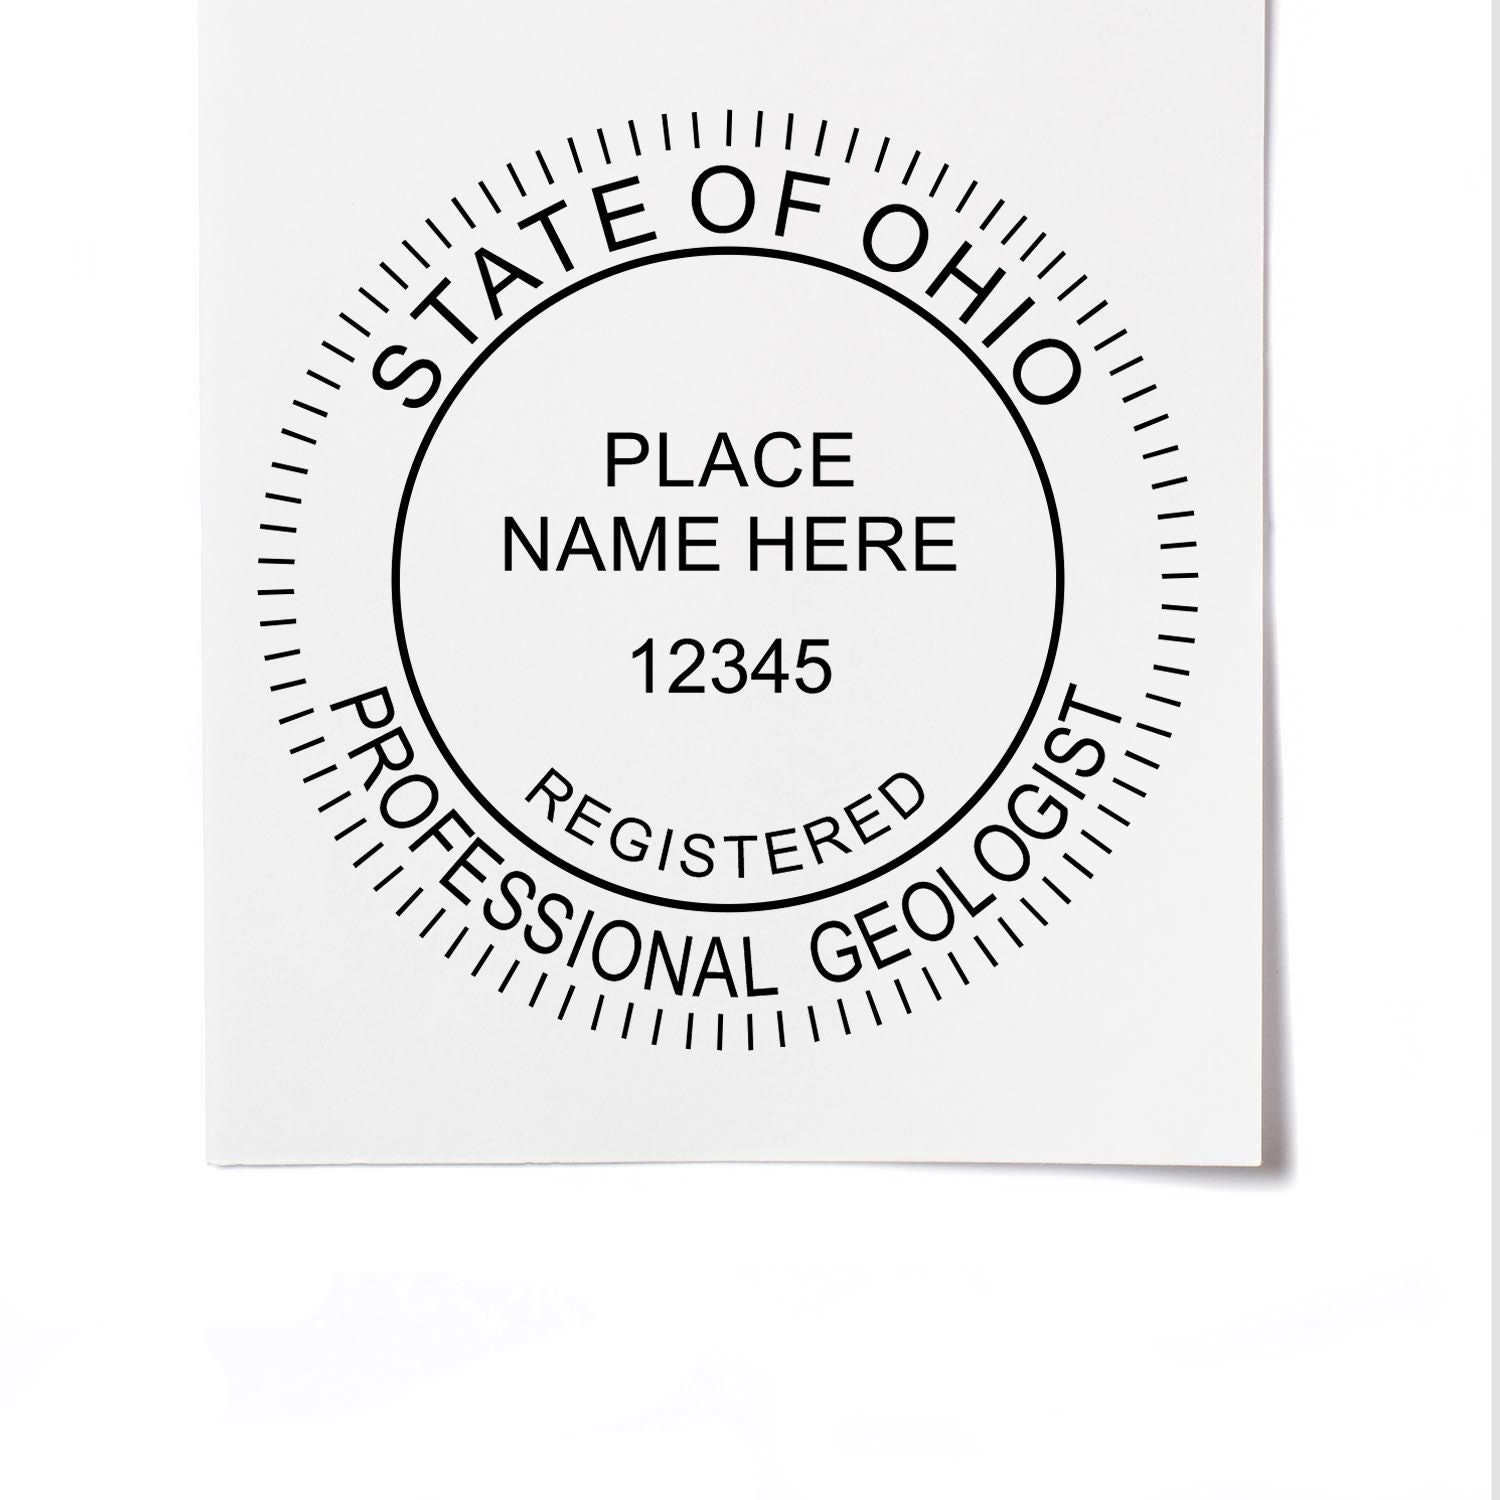 The main image for the Slim Pre-Inked Ohio Professional Geologist Seal Stamp depicting a sample of the imprint and imprint sample